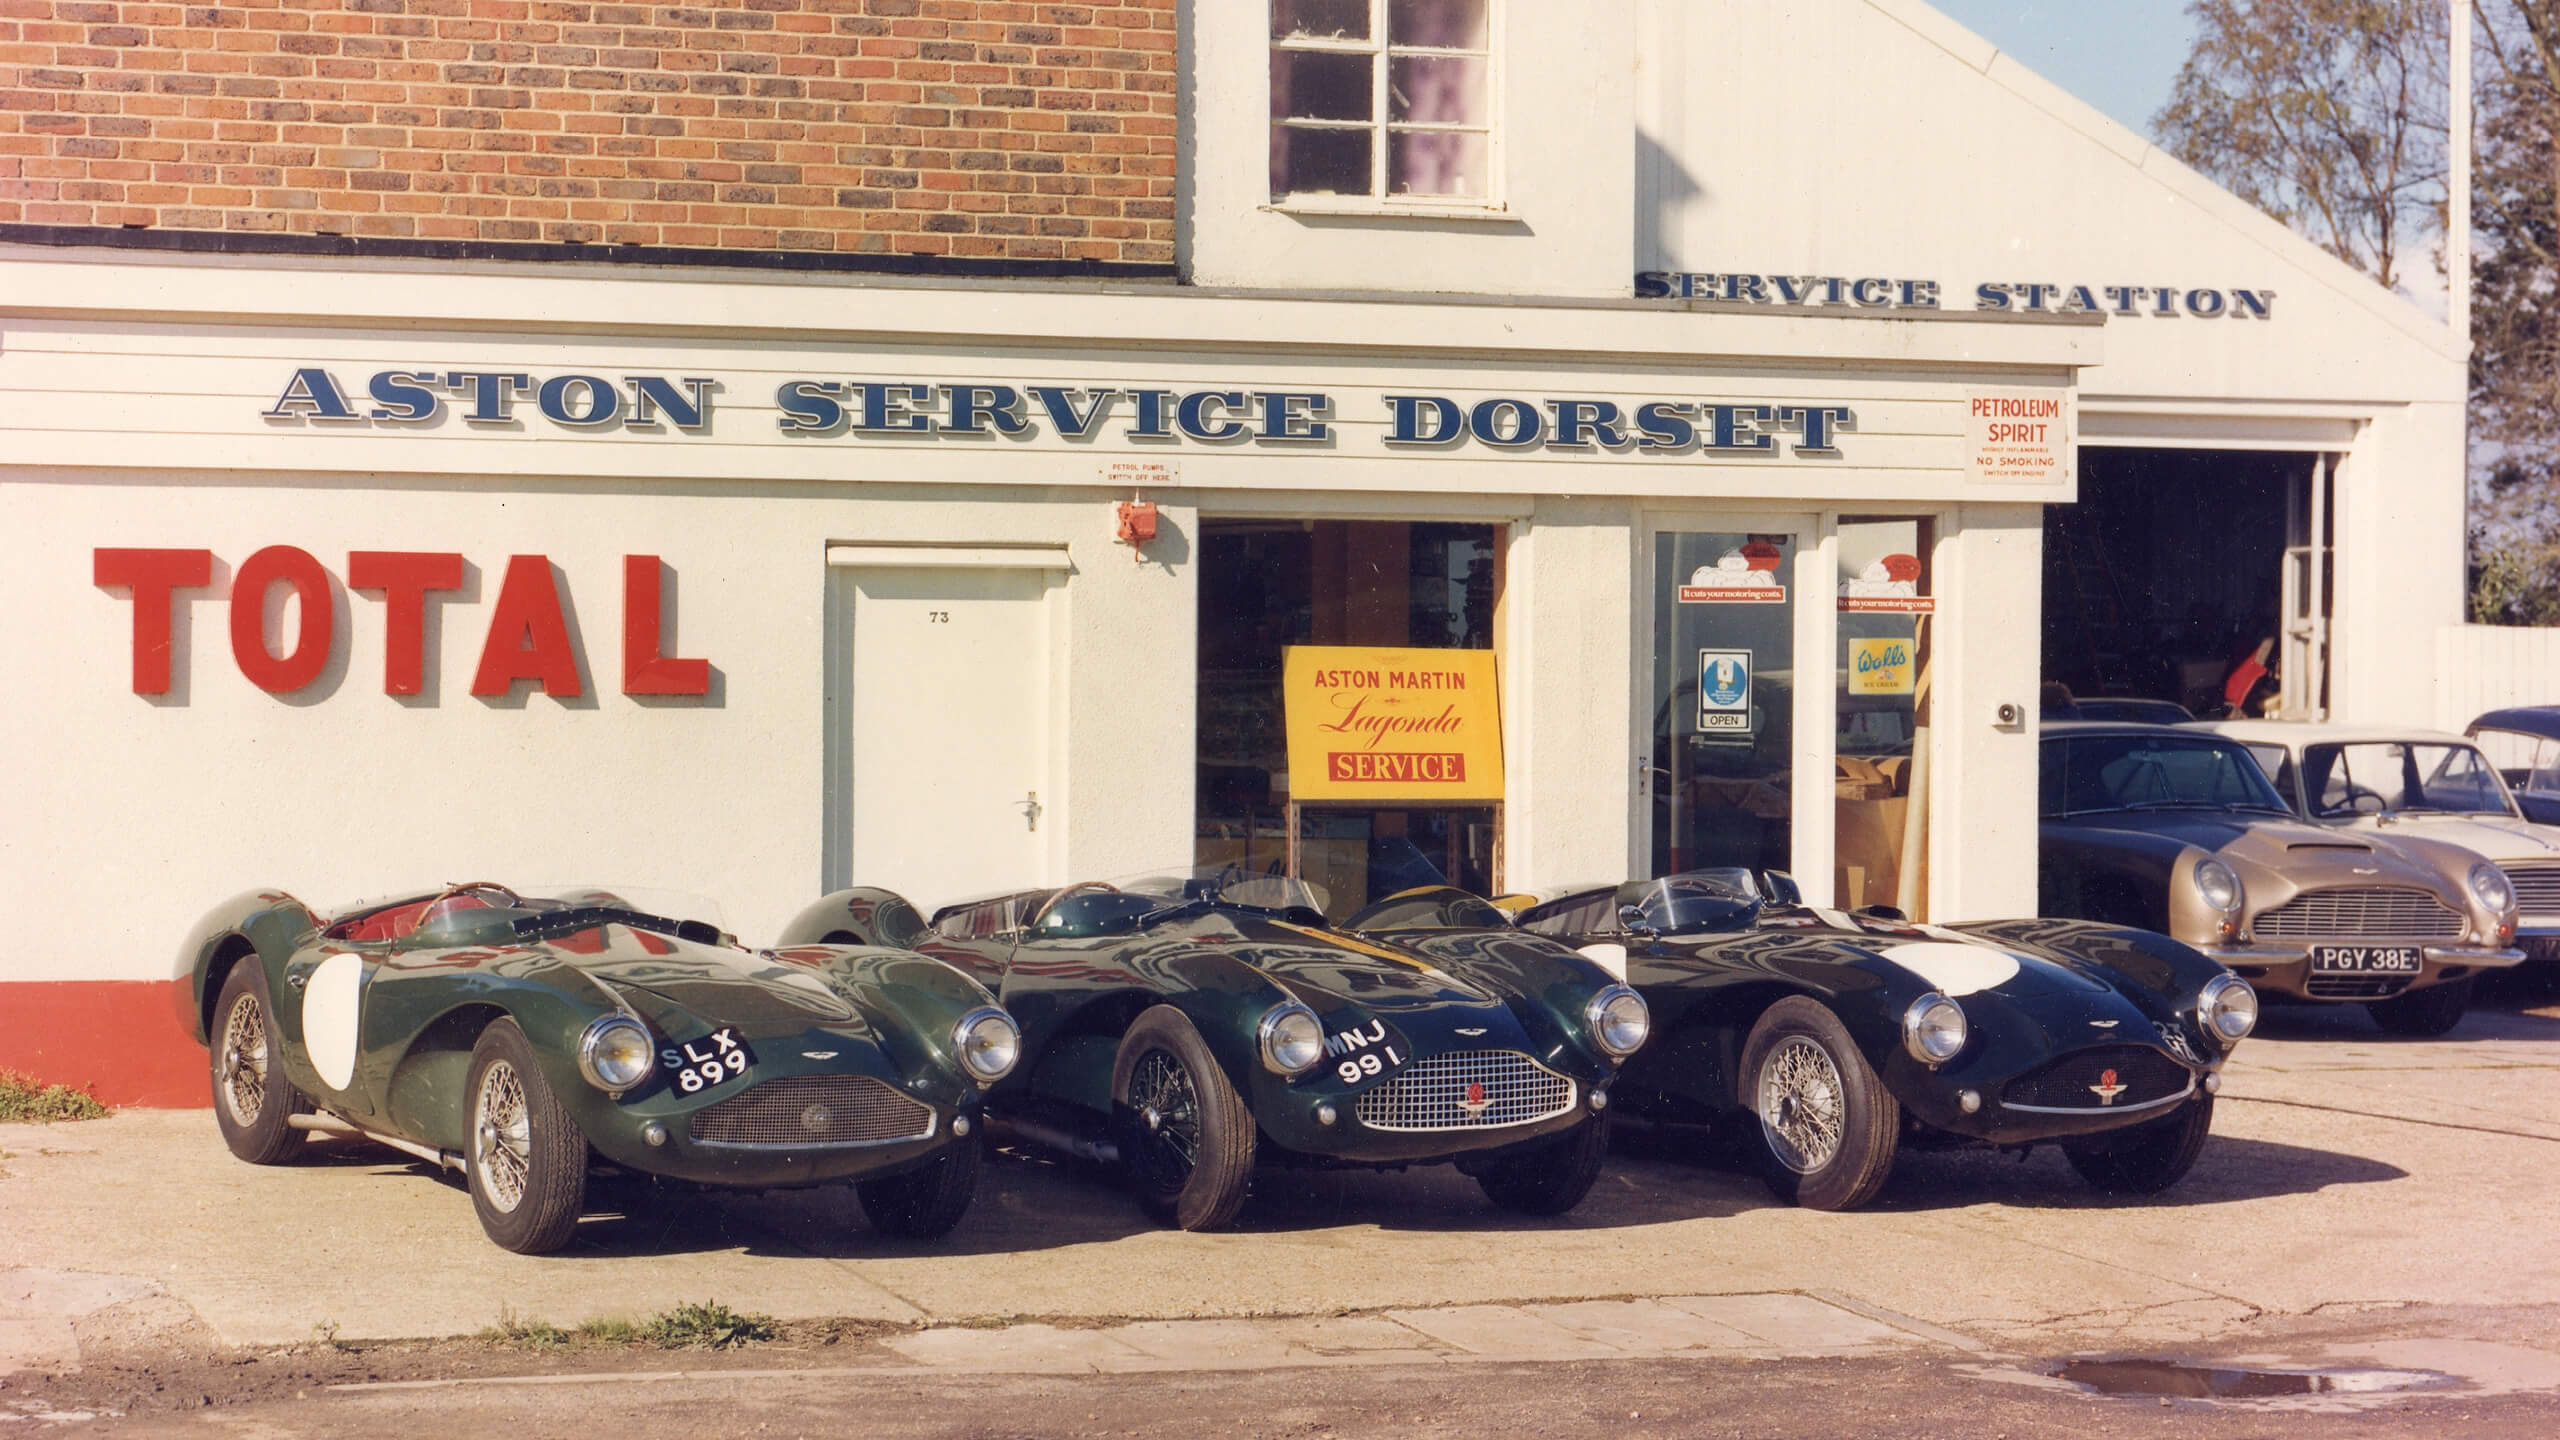 Ask the experts: Aston Service Dorset